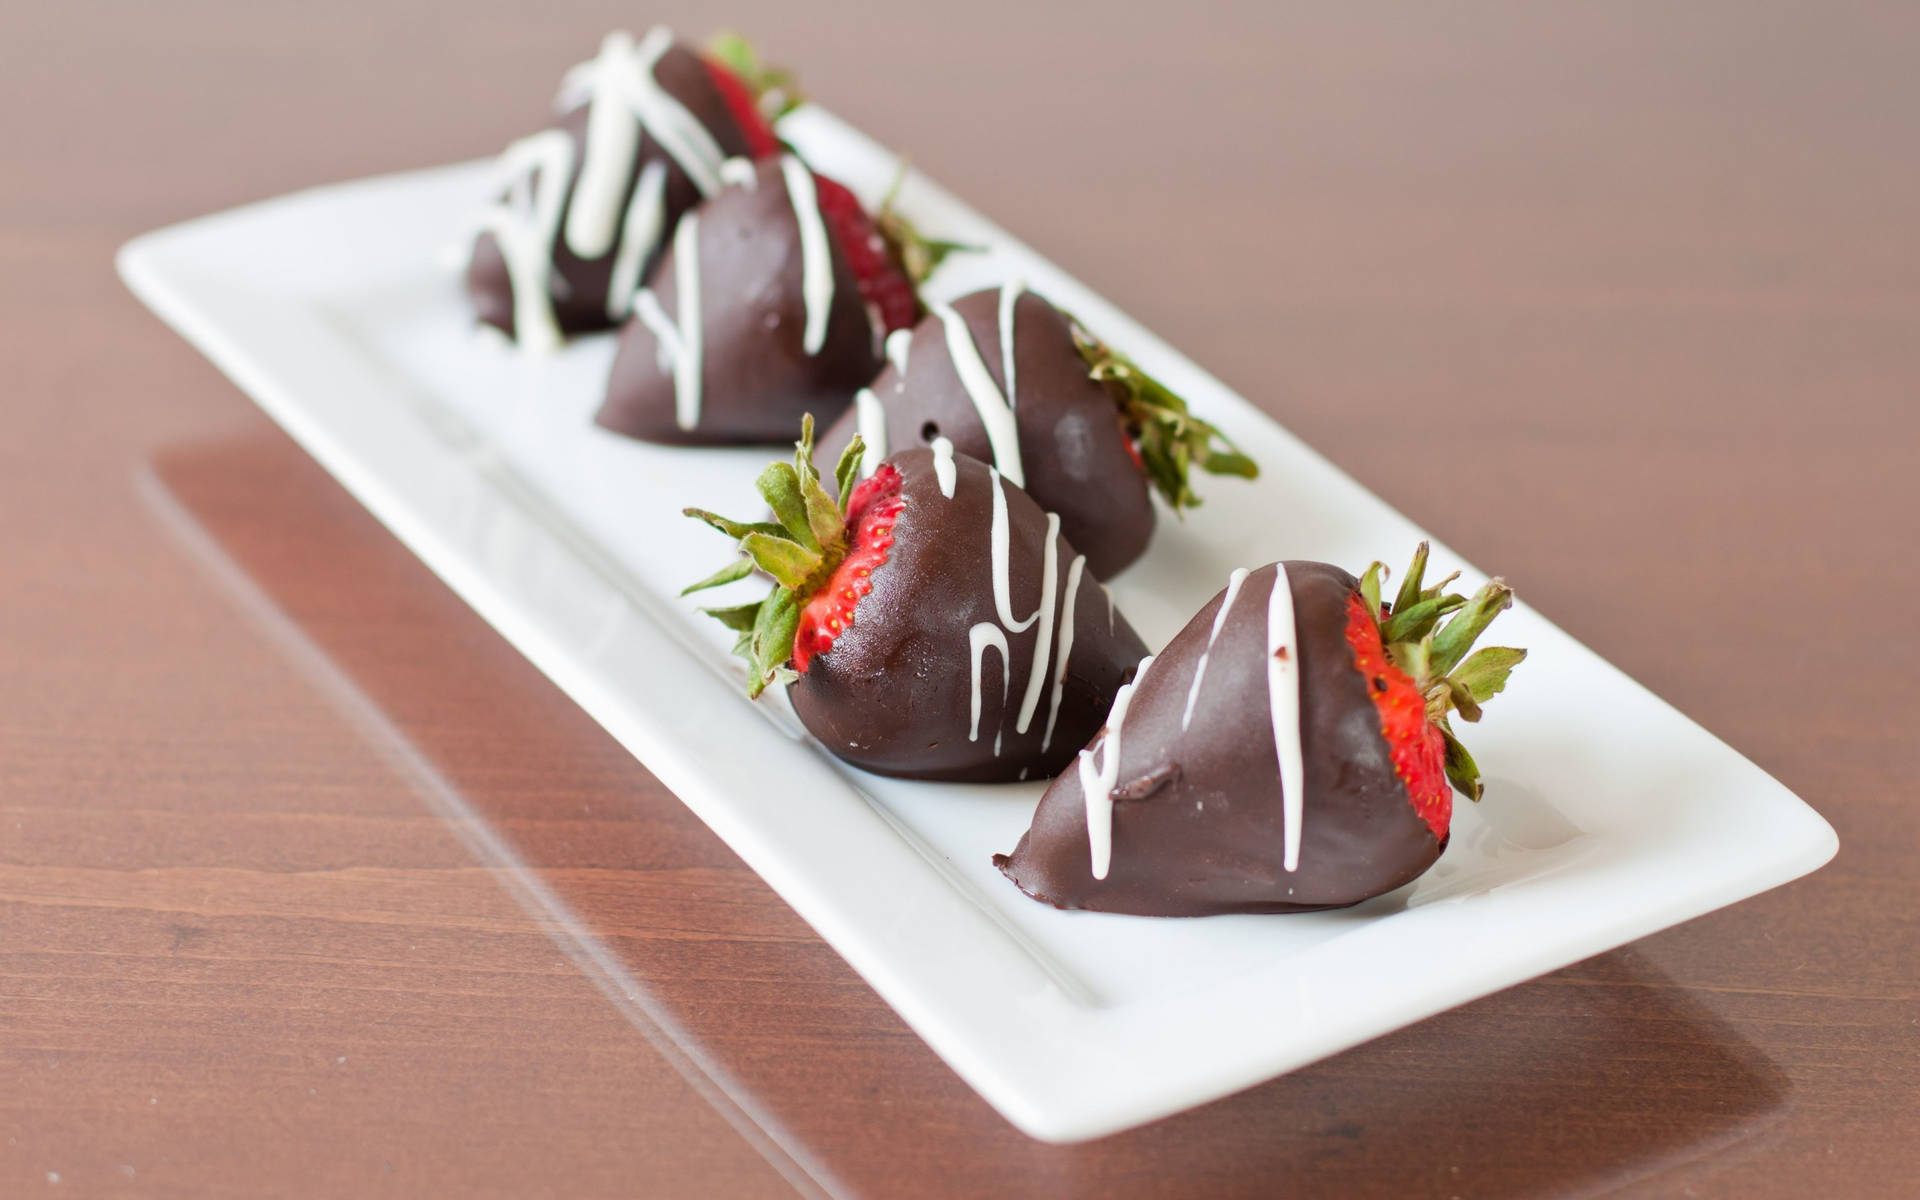 Caption: Delightful Chocolate Dipped Strawberries Background